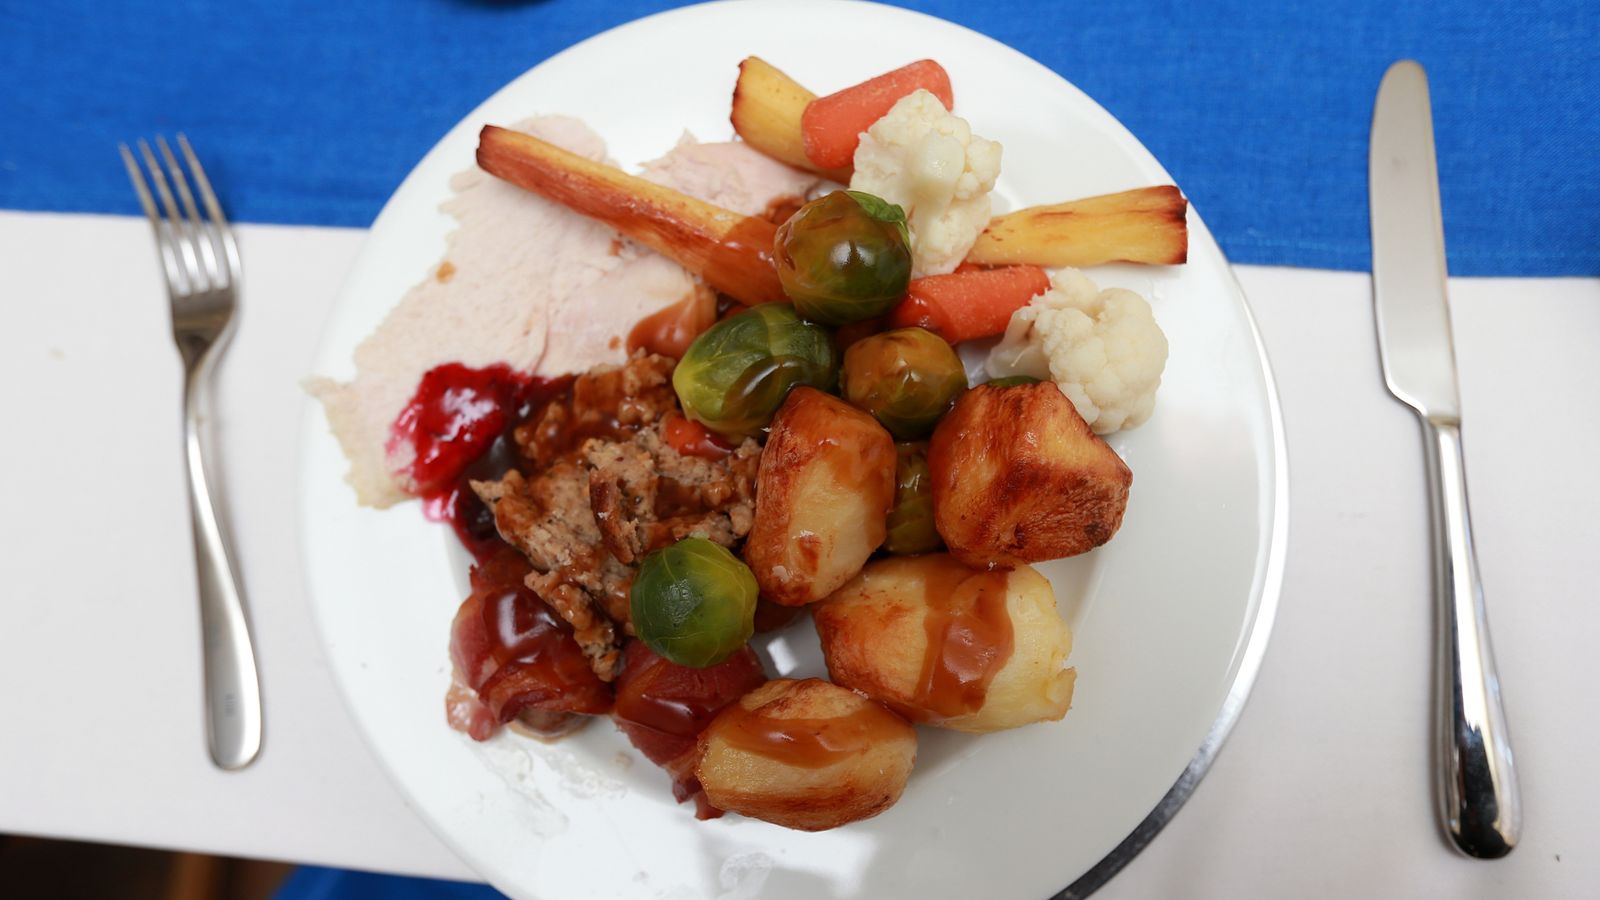 'It's going to be terrible for me': Two-thirds of adults worry they cannot afford Christmas dinner